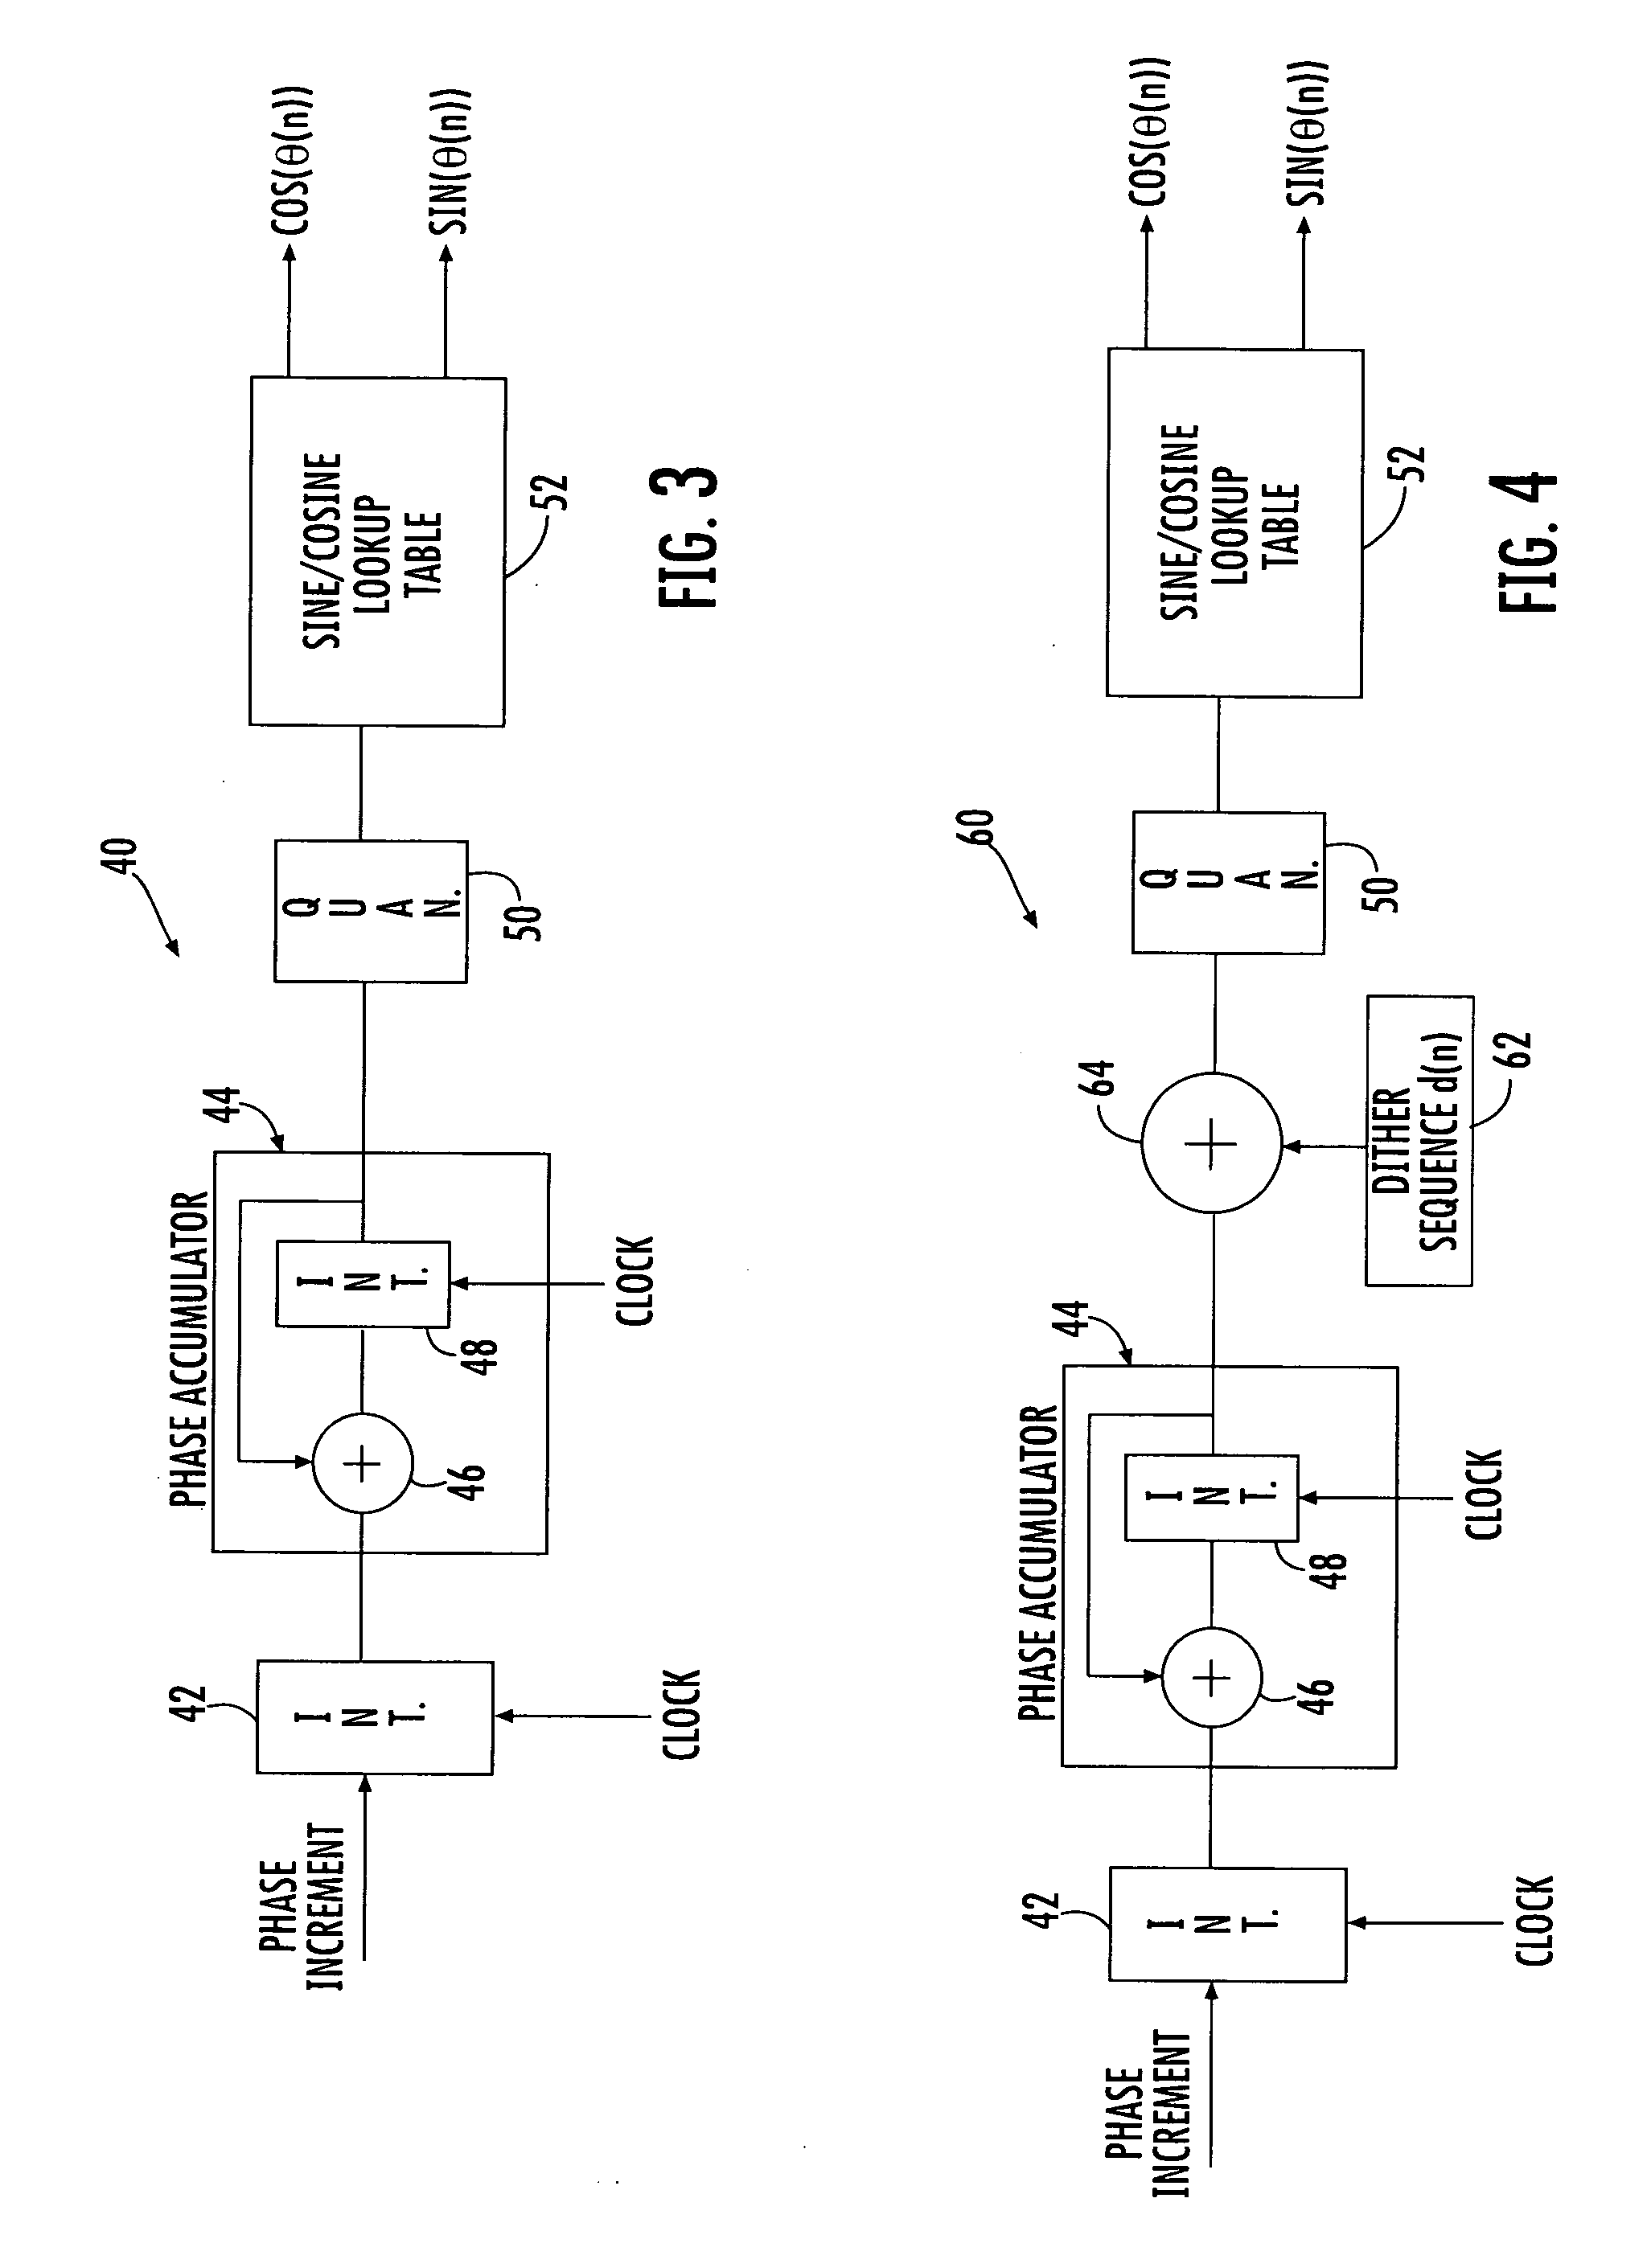 Direct digital synthesizer system and related methods